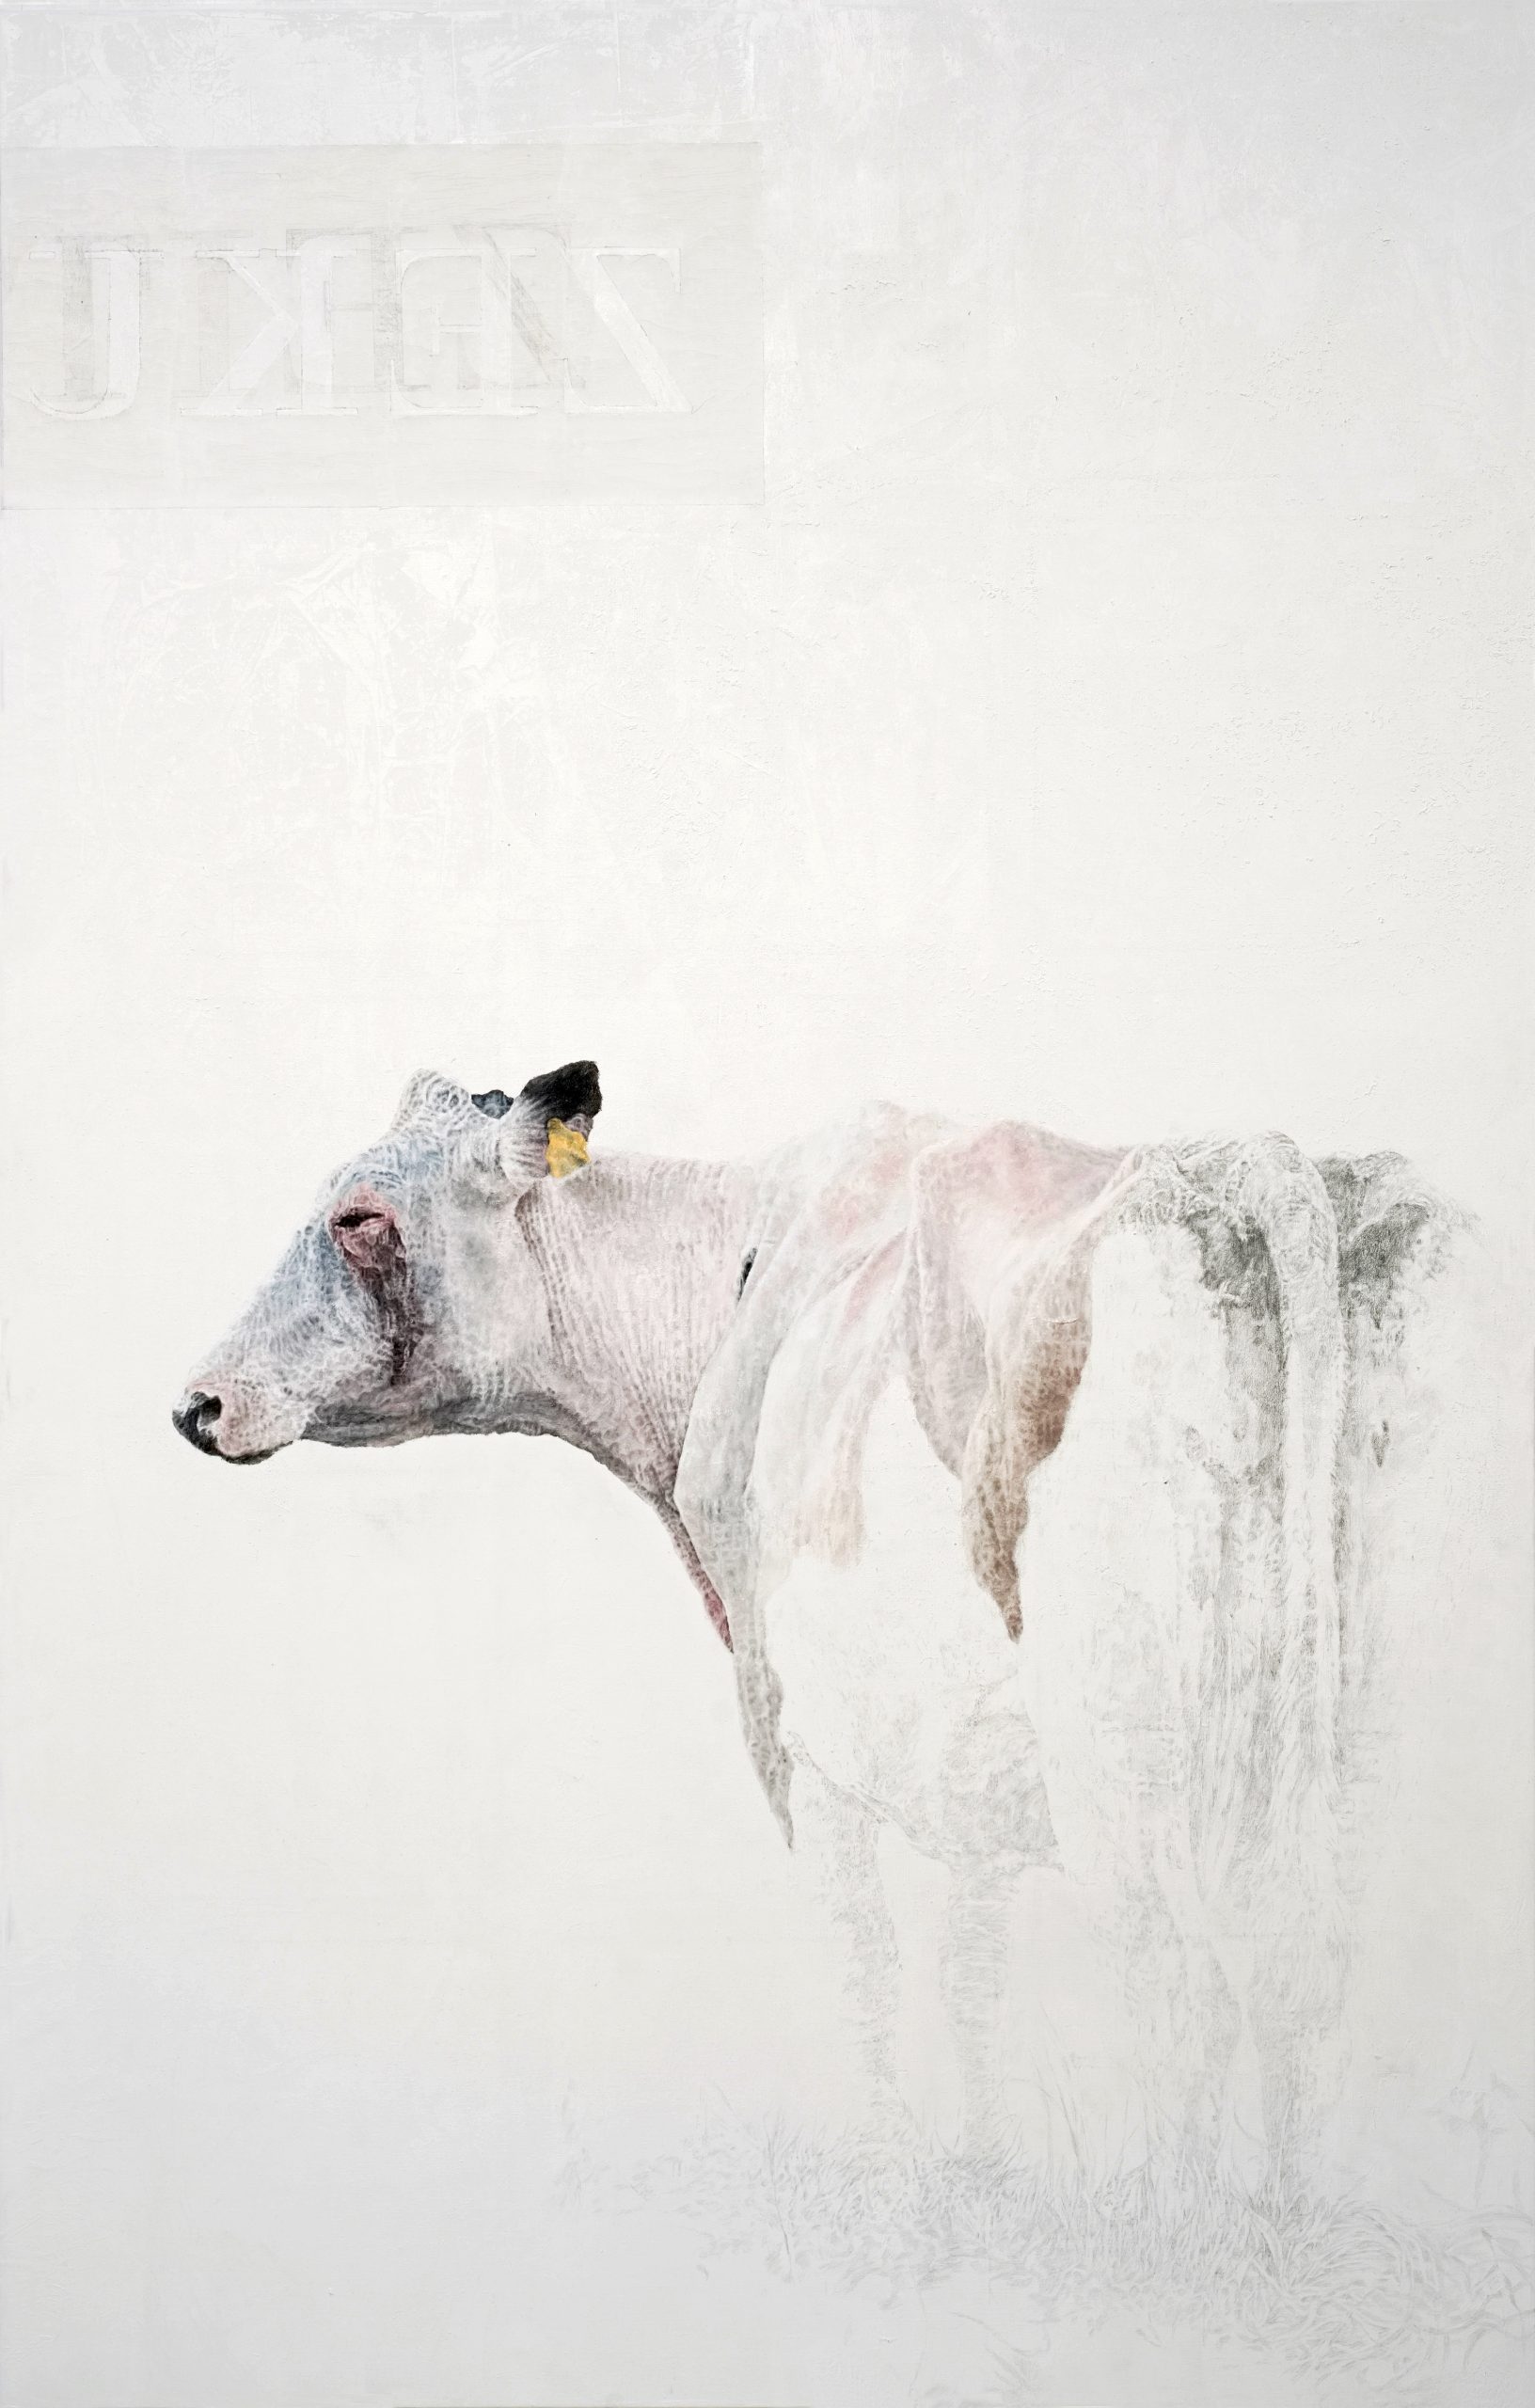 The Cow (ZEKU), 2020, Oil and Pencil on Canvas, 220 x 140 cm
